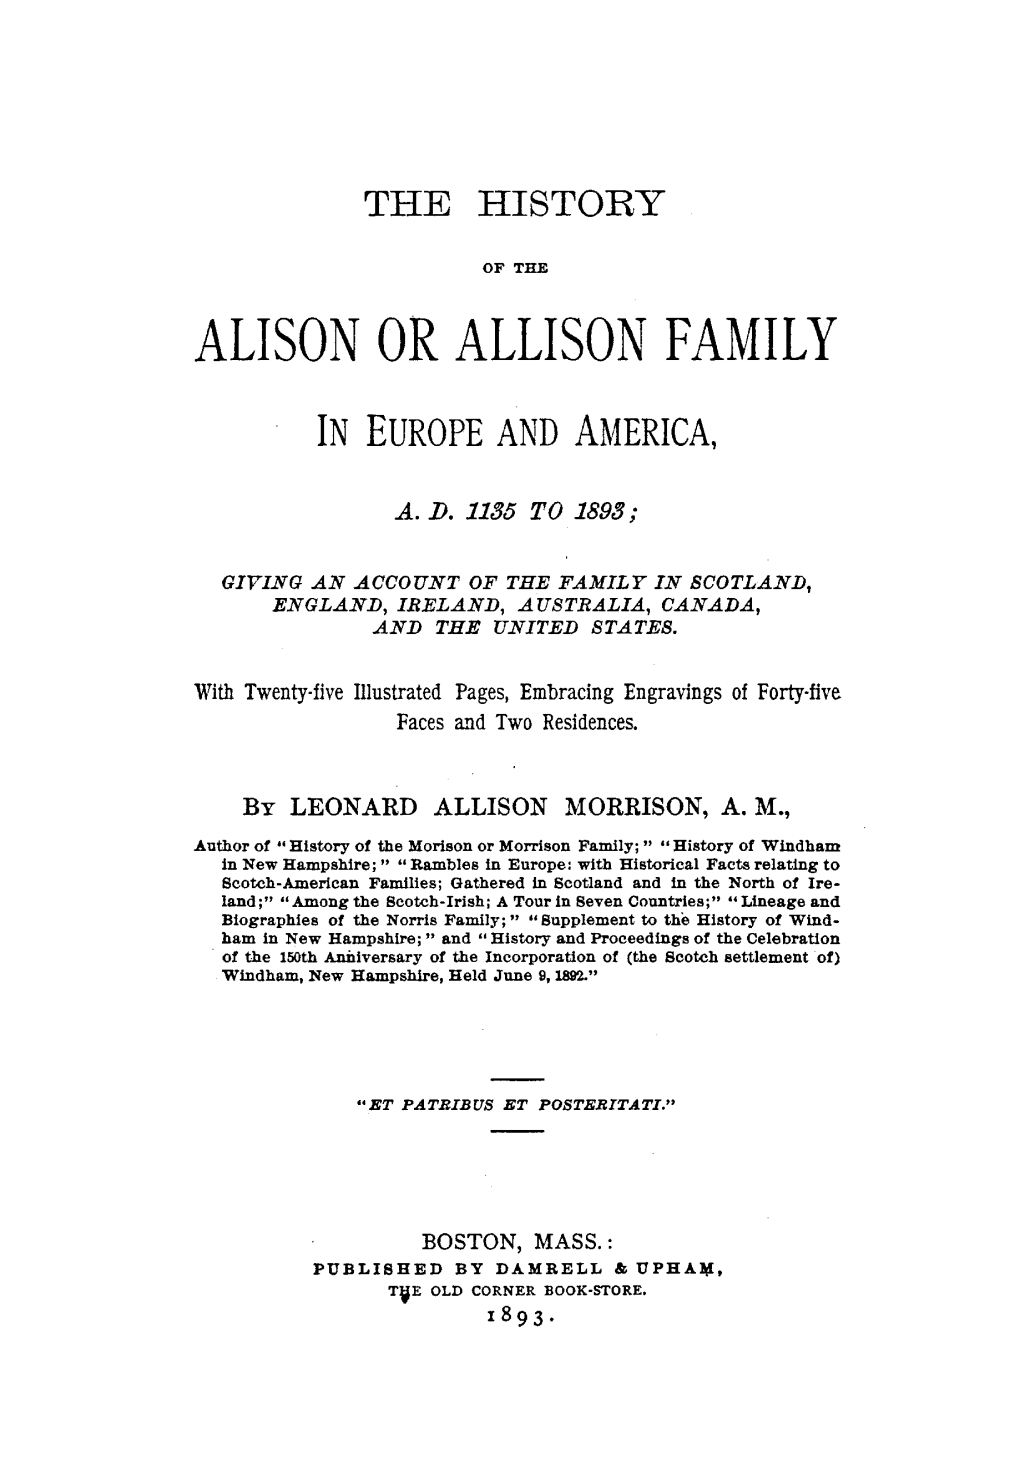 Alison Or Allison Family in Europe and America